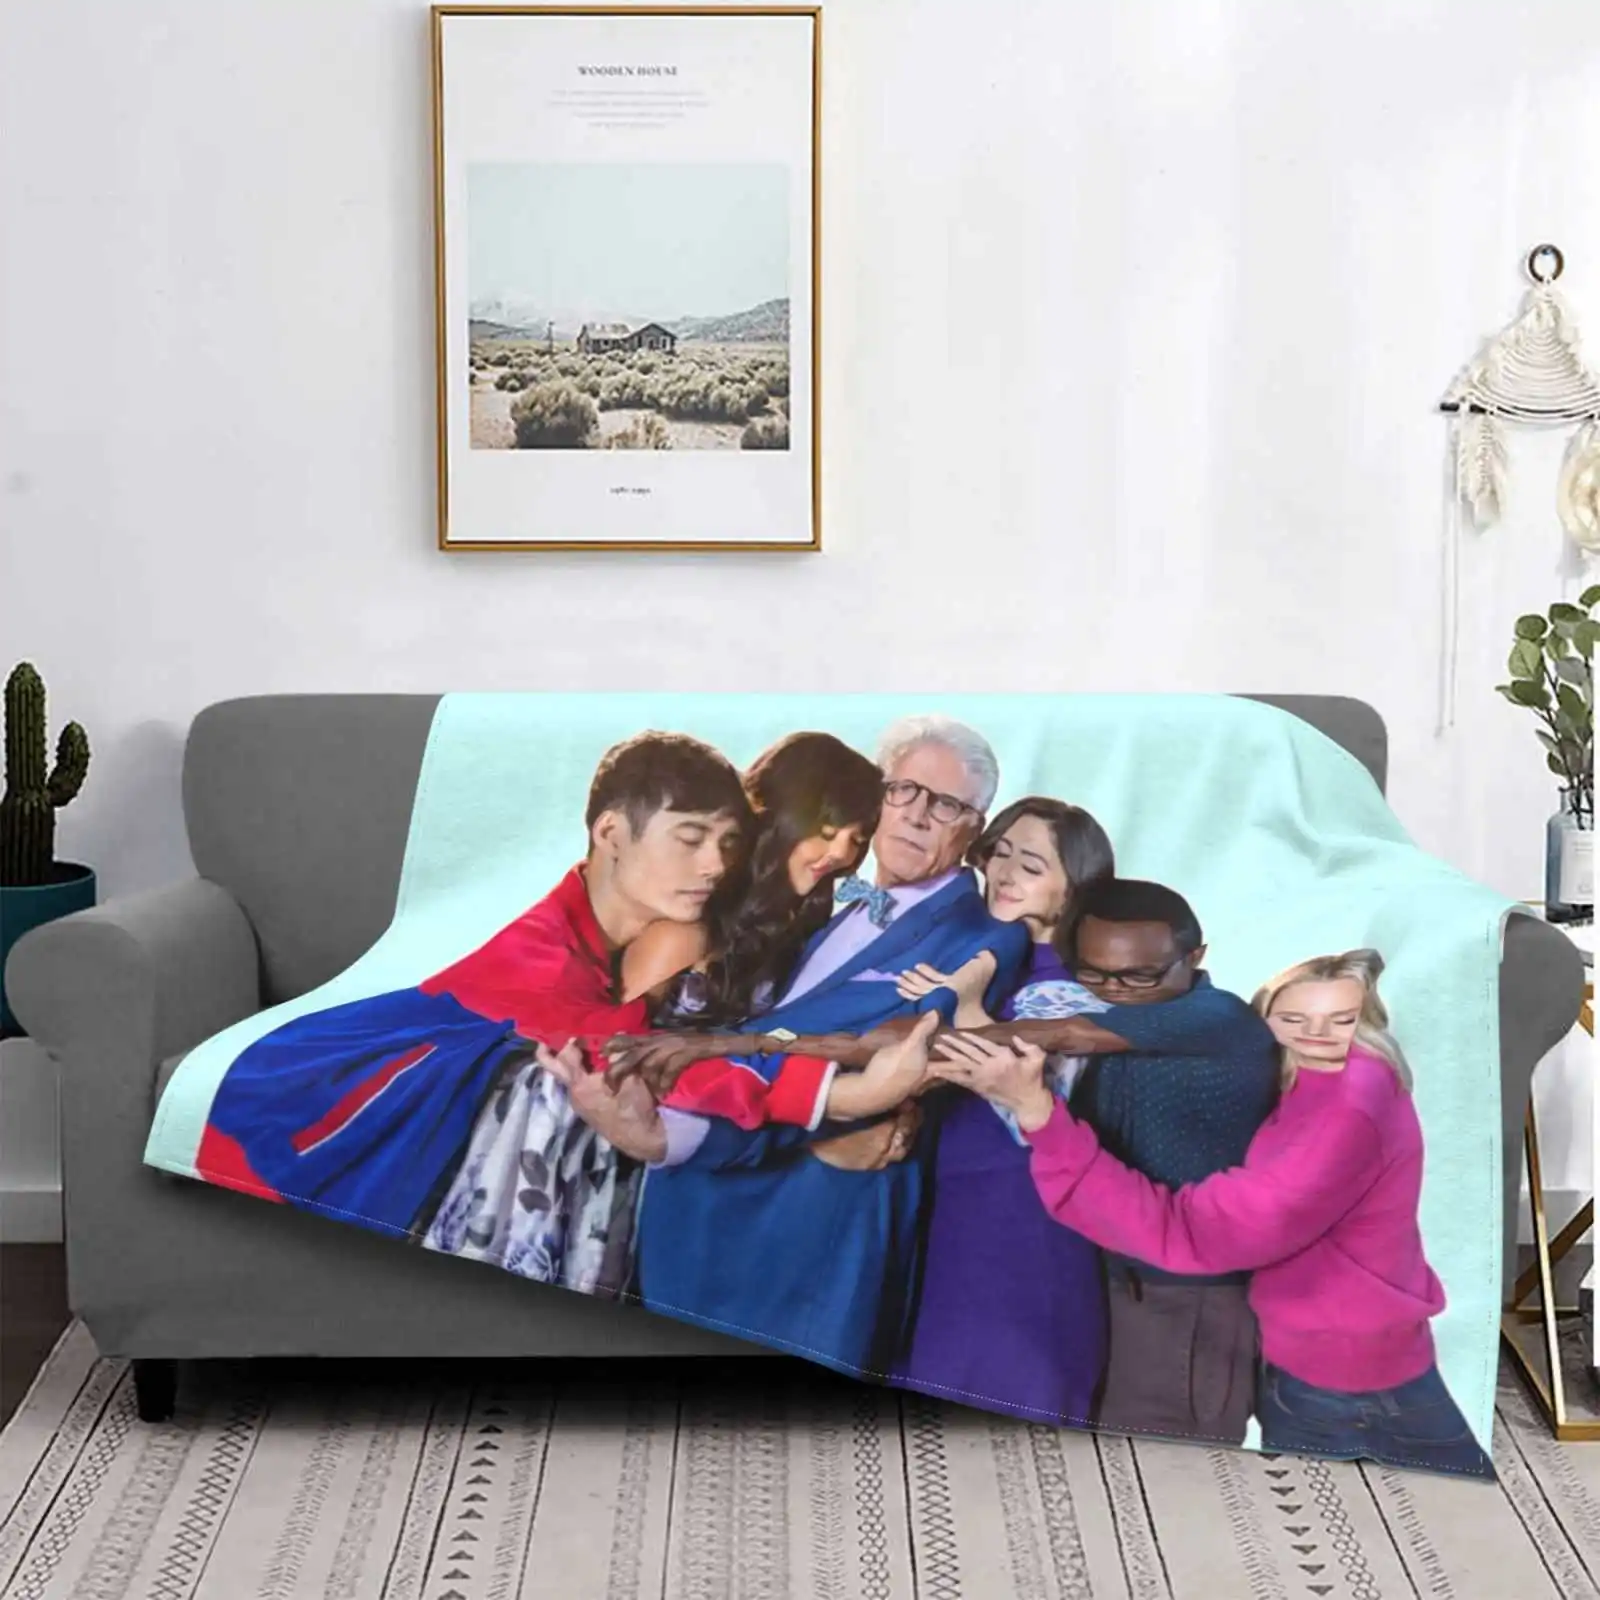 

The Good Place Cast All Sizes Soft Cover Blanket Home Decor Bedding The Good Place Good Place Eleanor Shellstrop Kristen Bell